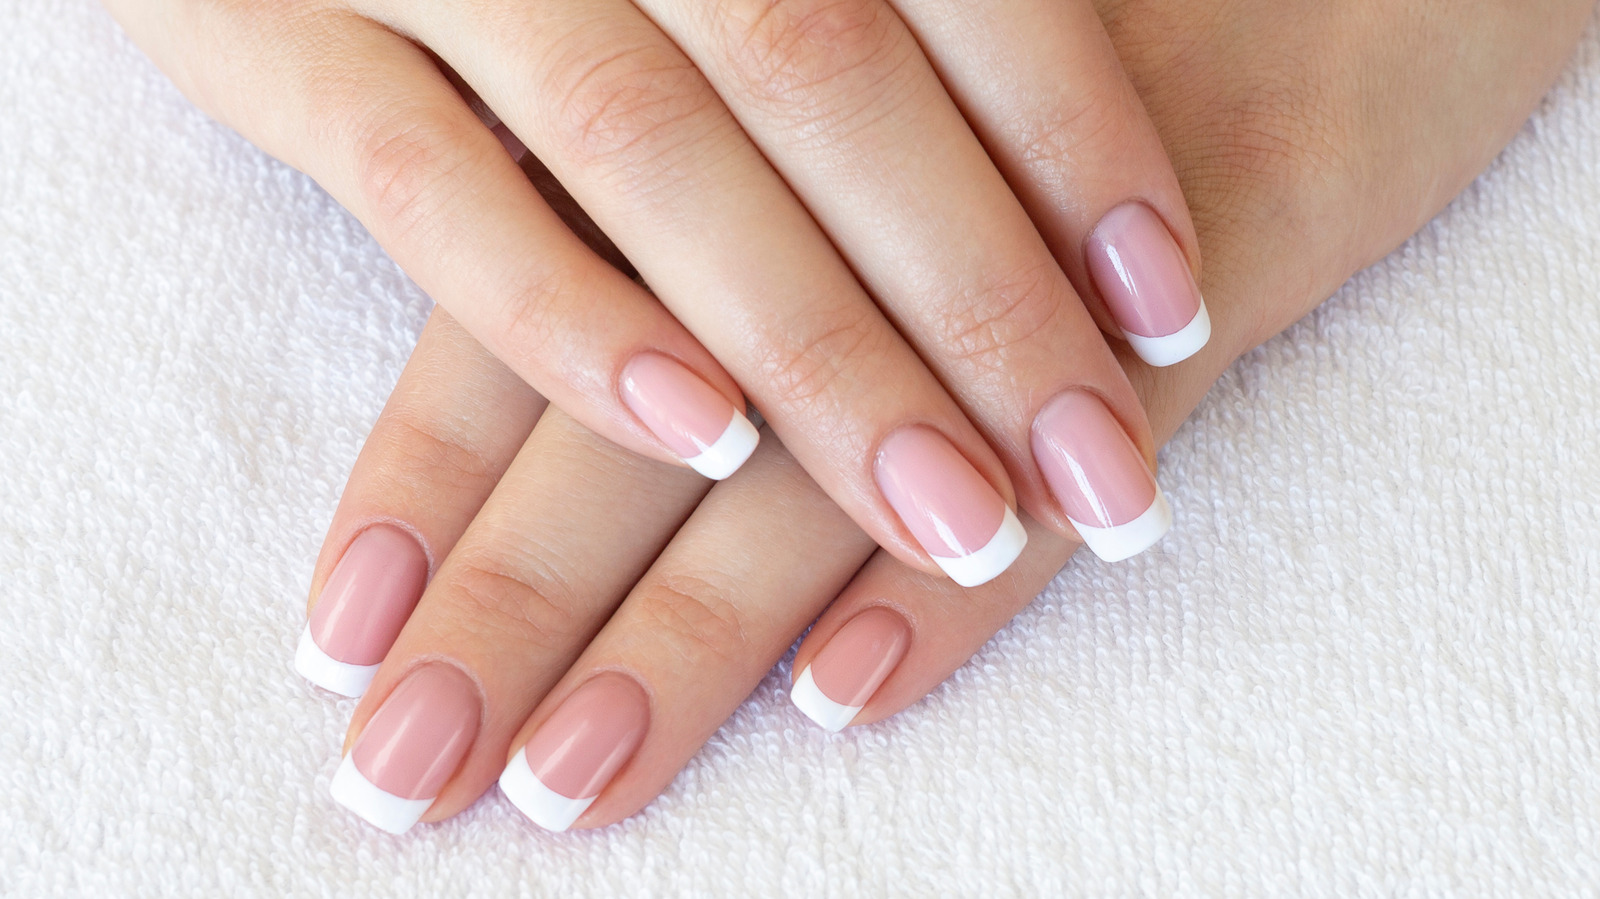 4. "Consider a classic French manicure for a timeless and polished look" - wide 1